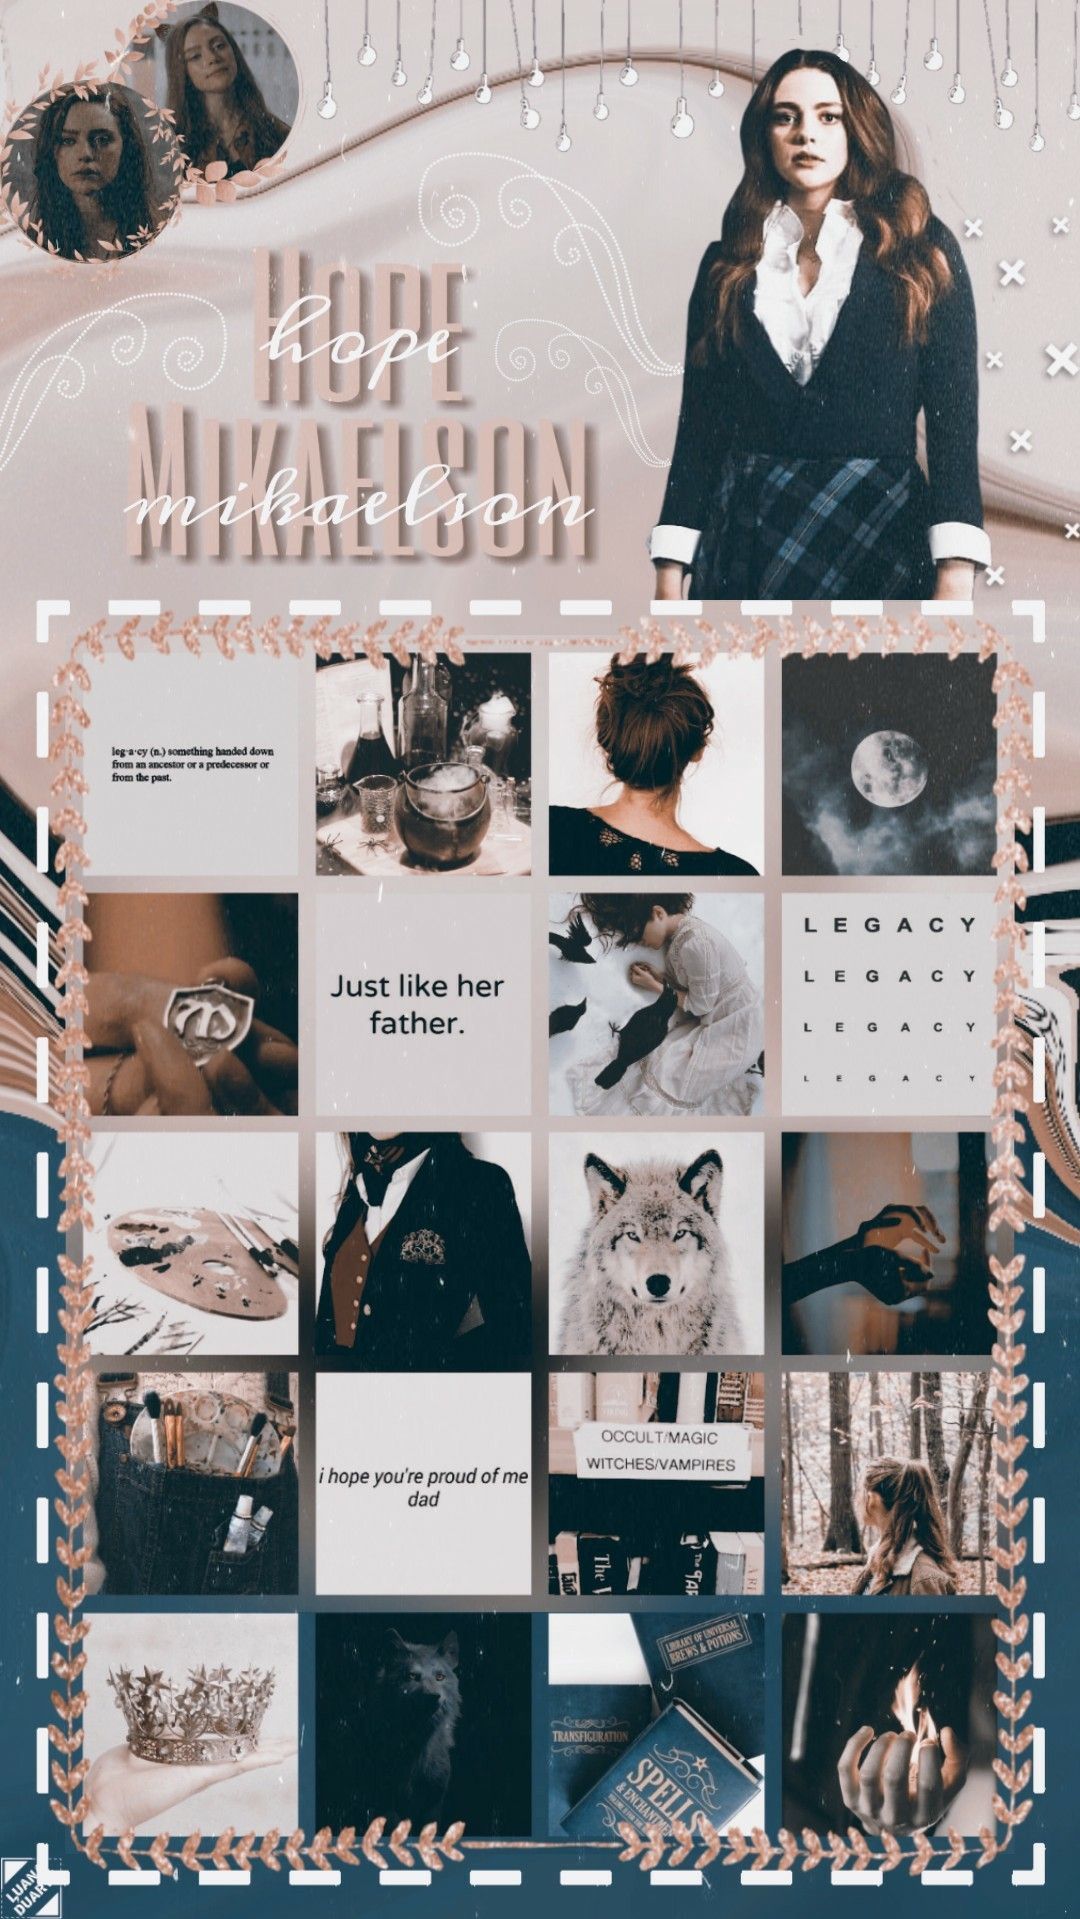 ⃝⃪⋆ᩚ ᩘ⋆᩠᮫໋ํۣۜ⇢My Edits. Hope wallpaper, Hope mikaelson, The originals